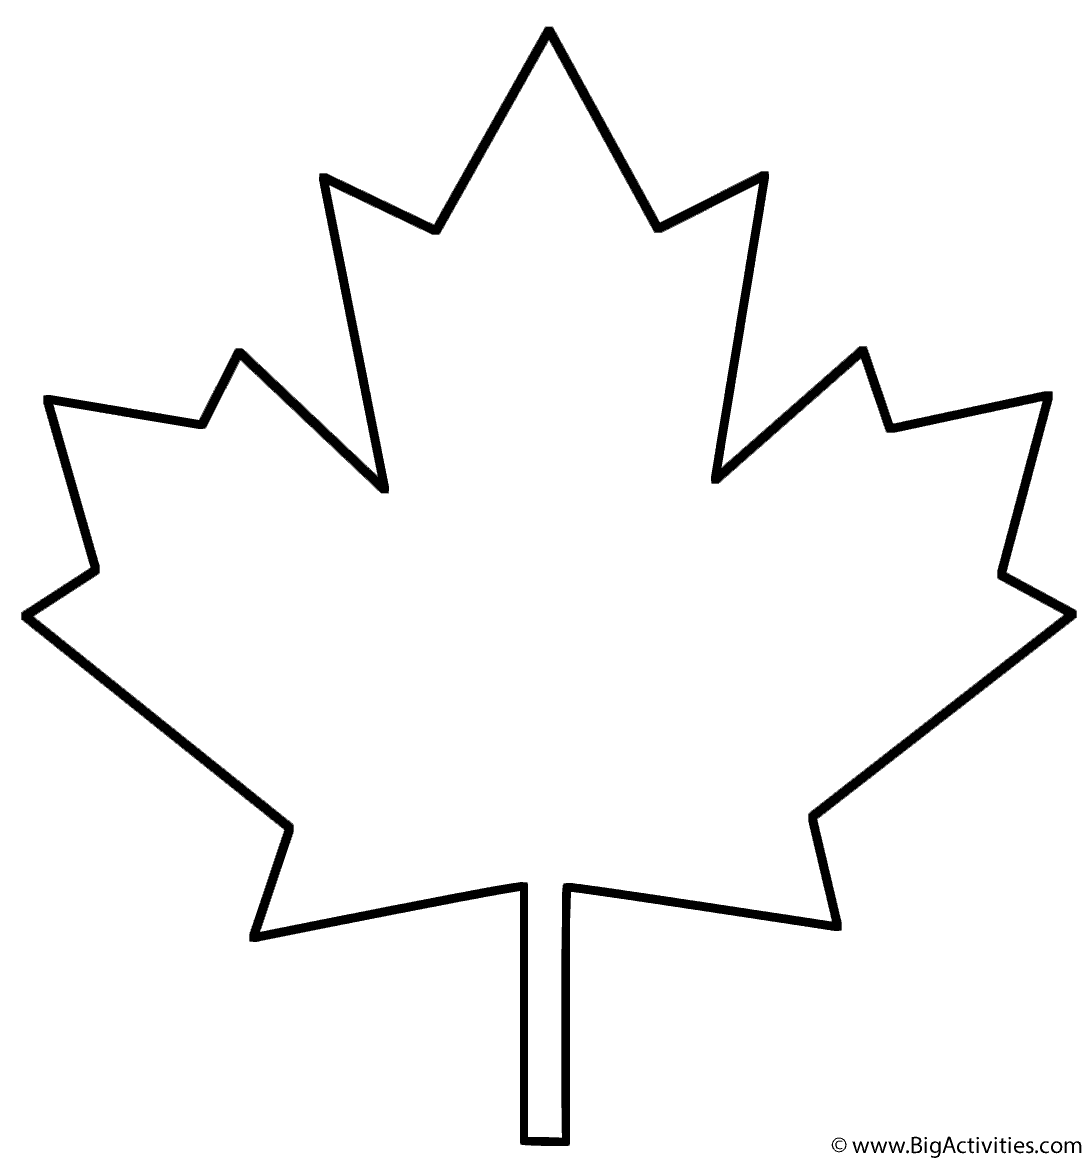 Coloring Page Maple Leaf Template Leaf Coloring Page Leaves 